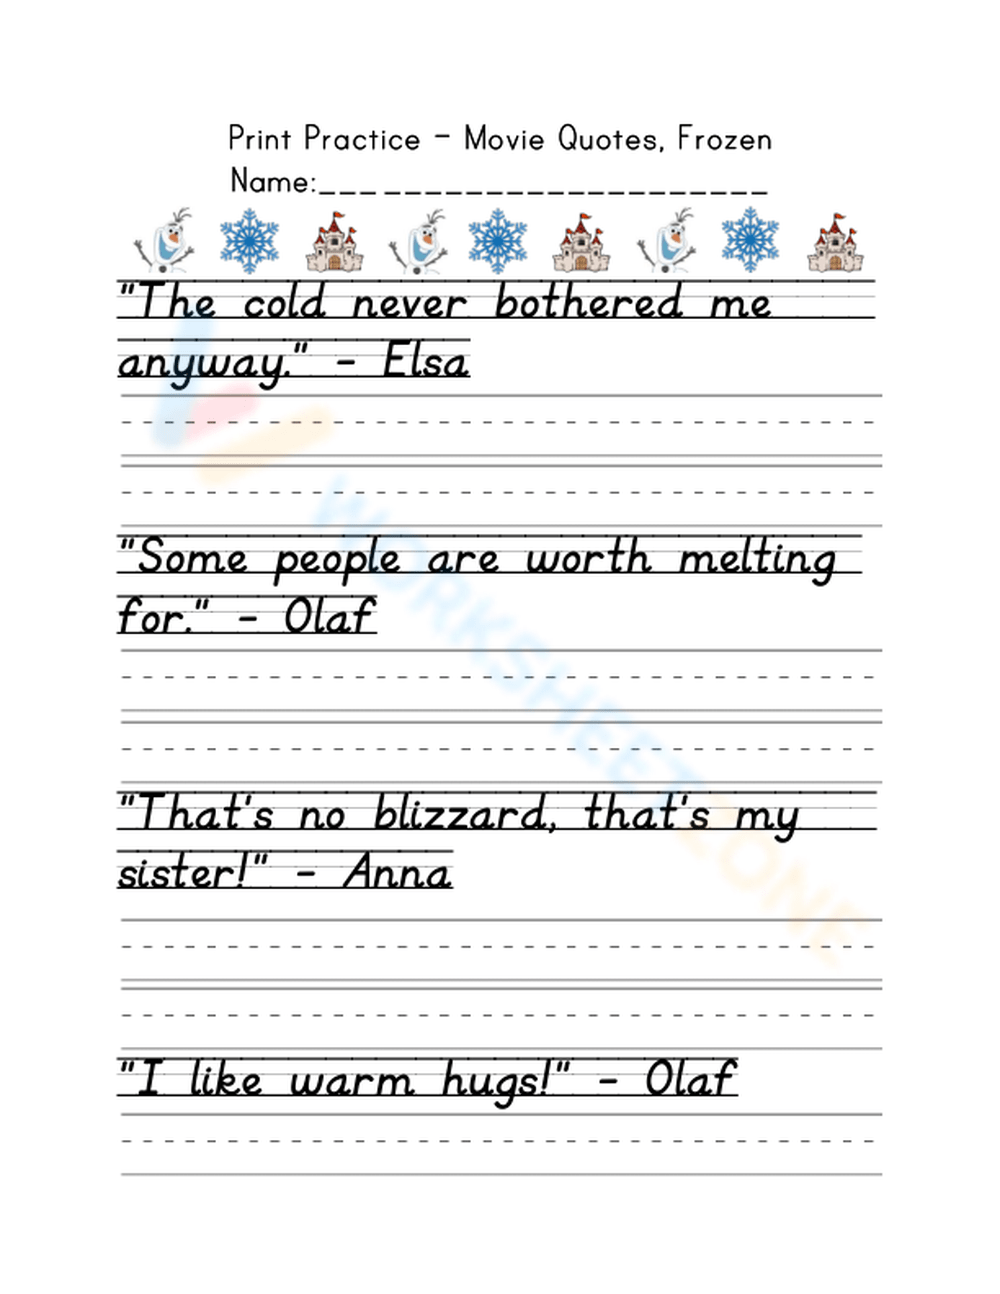 Free Printable Neat Handwriting Practice Sheets For All Ages